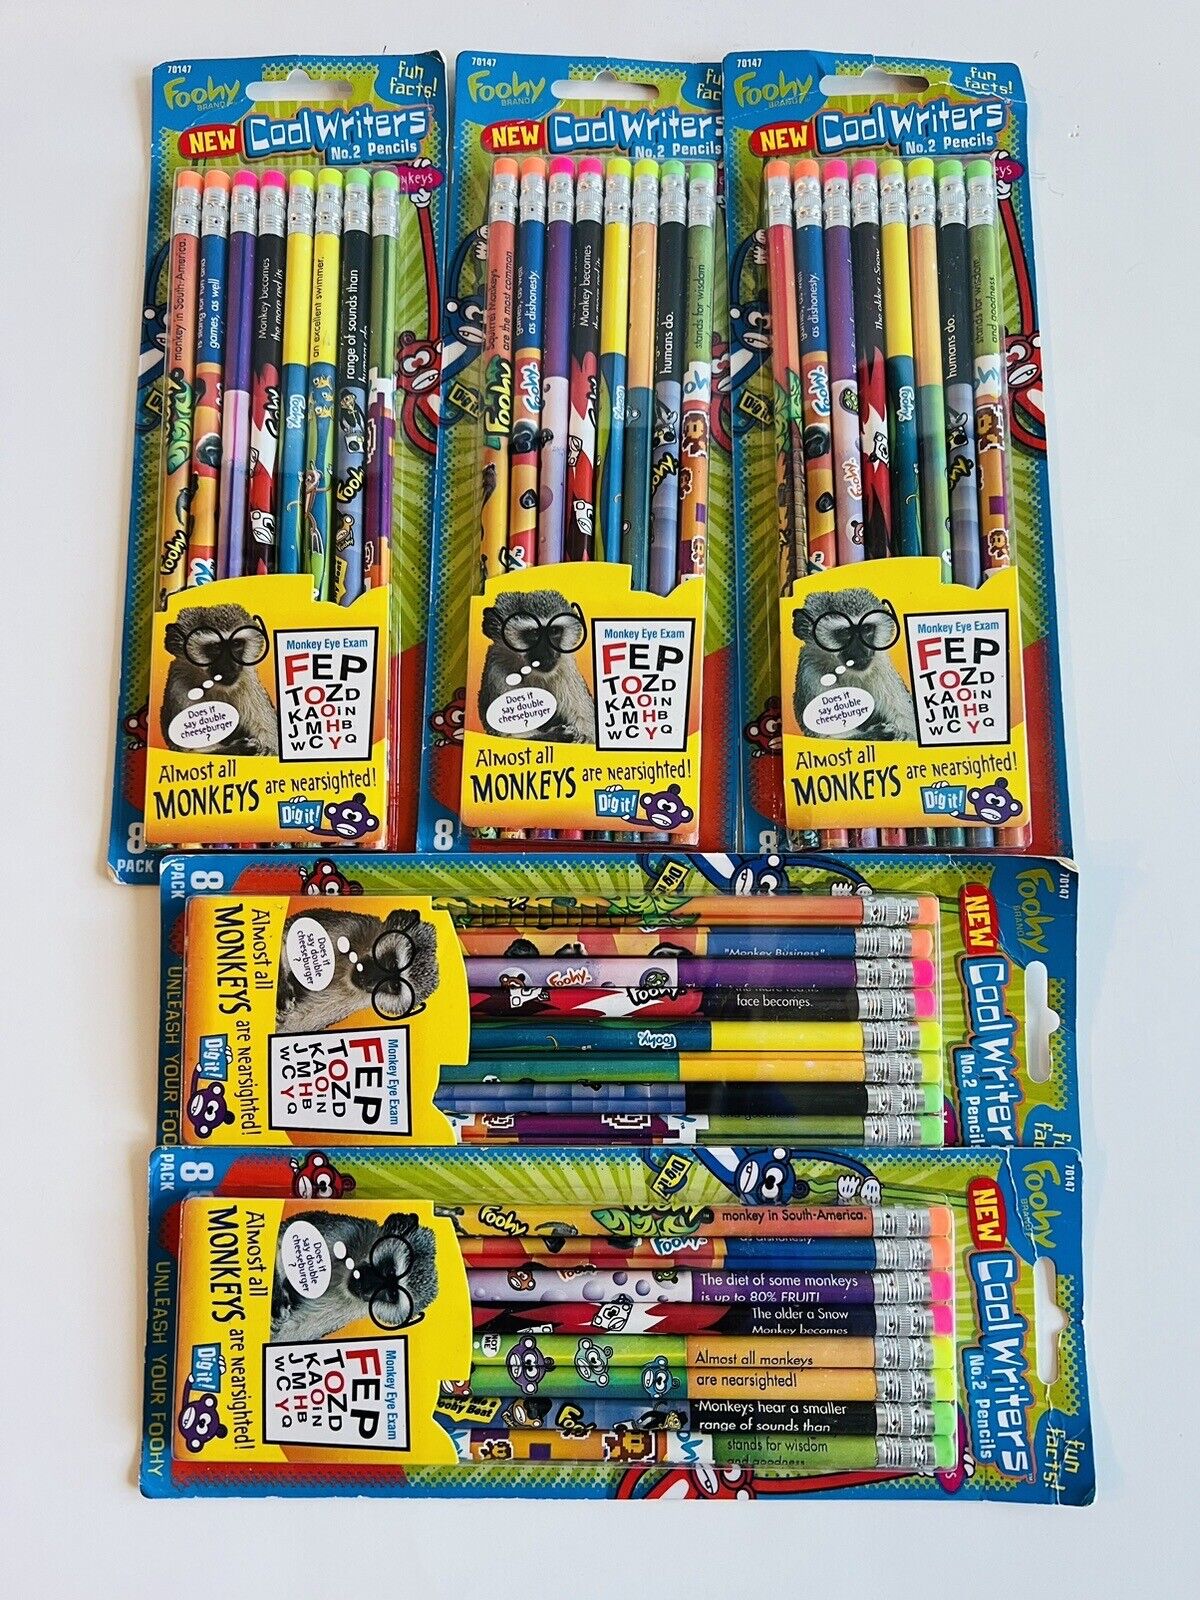 Foohy 2005 RARE Cool Writers #2 Pencils Almost All Monkeys Are Near Sighted